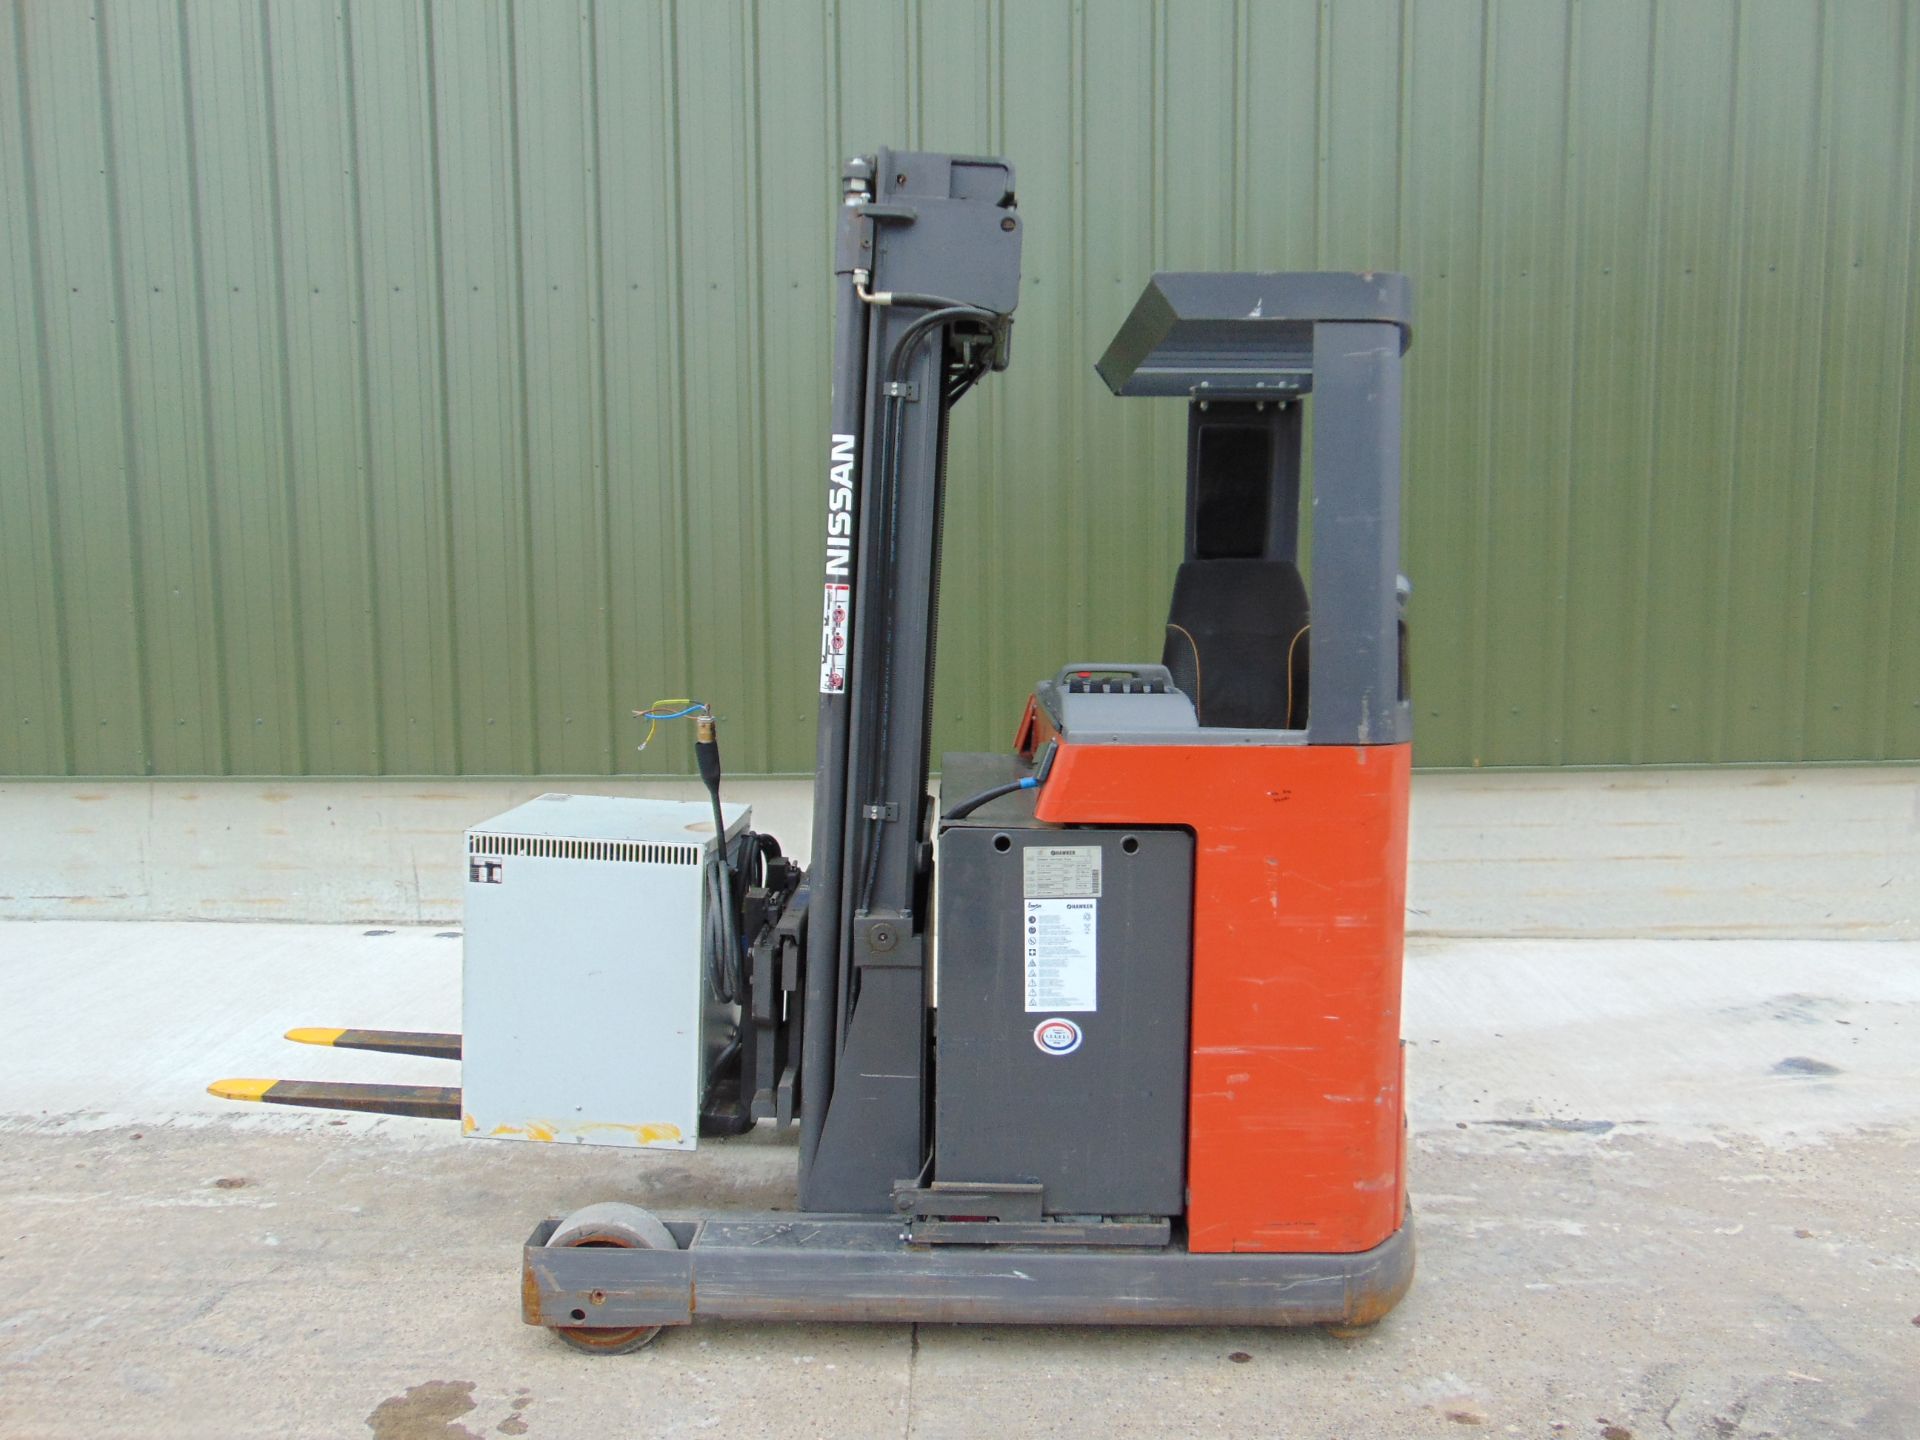 Nissan UNS-200 Electric Reach Fork Lift w/ Battery Charger Unit 2283 hrs - Image 2 of 31